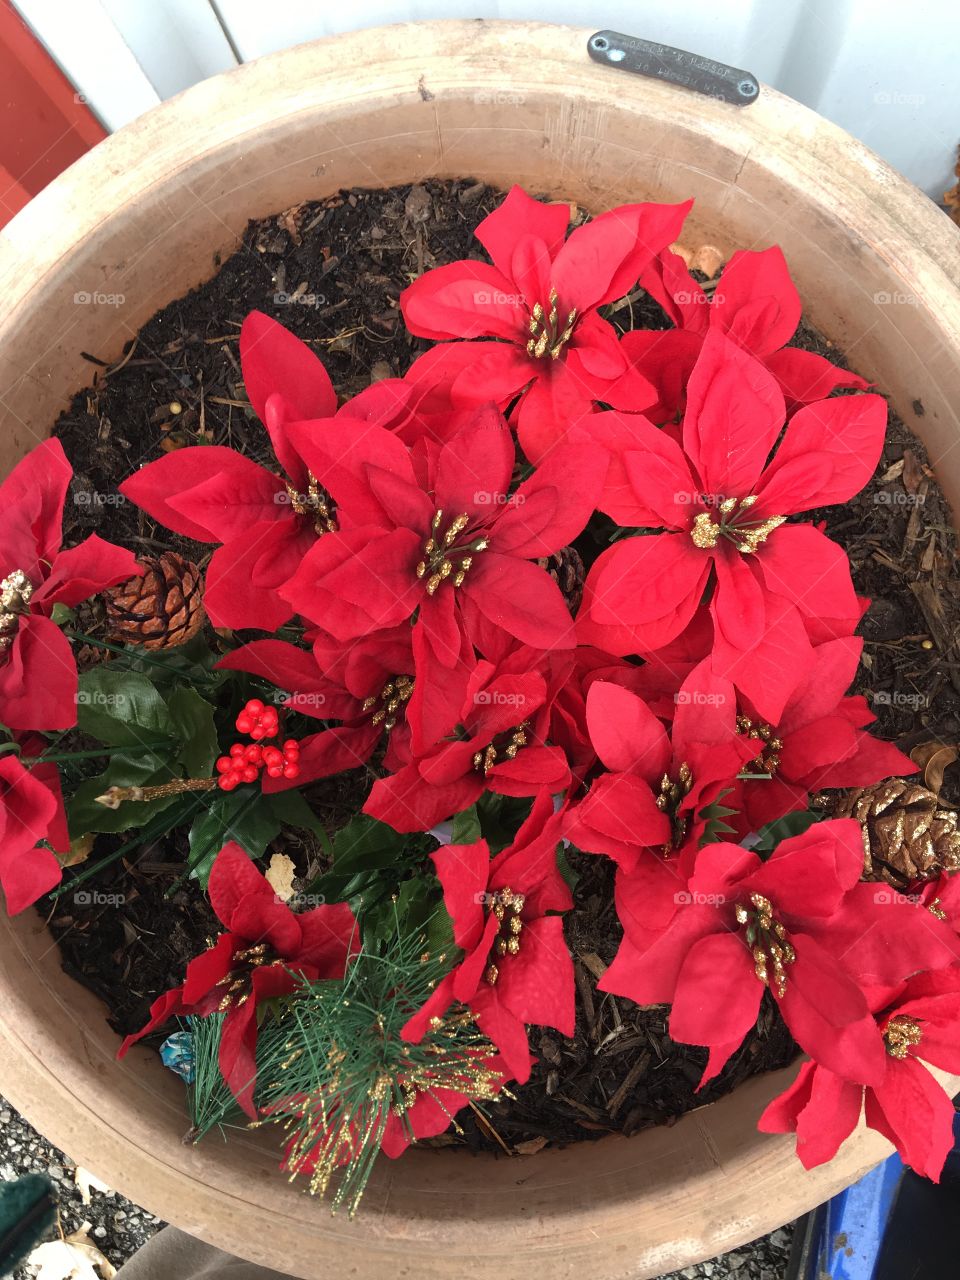 Fake poinsettias in a round planter showing off the holidays spirit! Let’s celebrate!